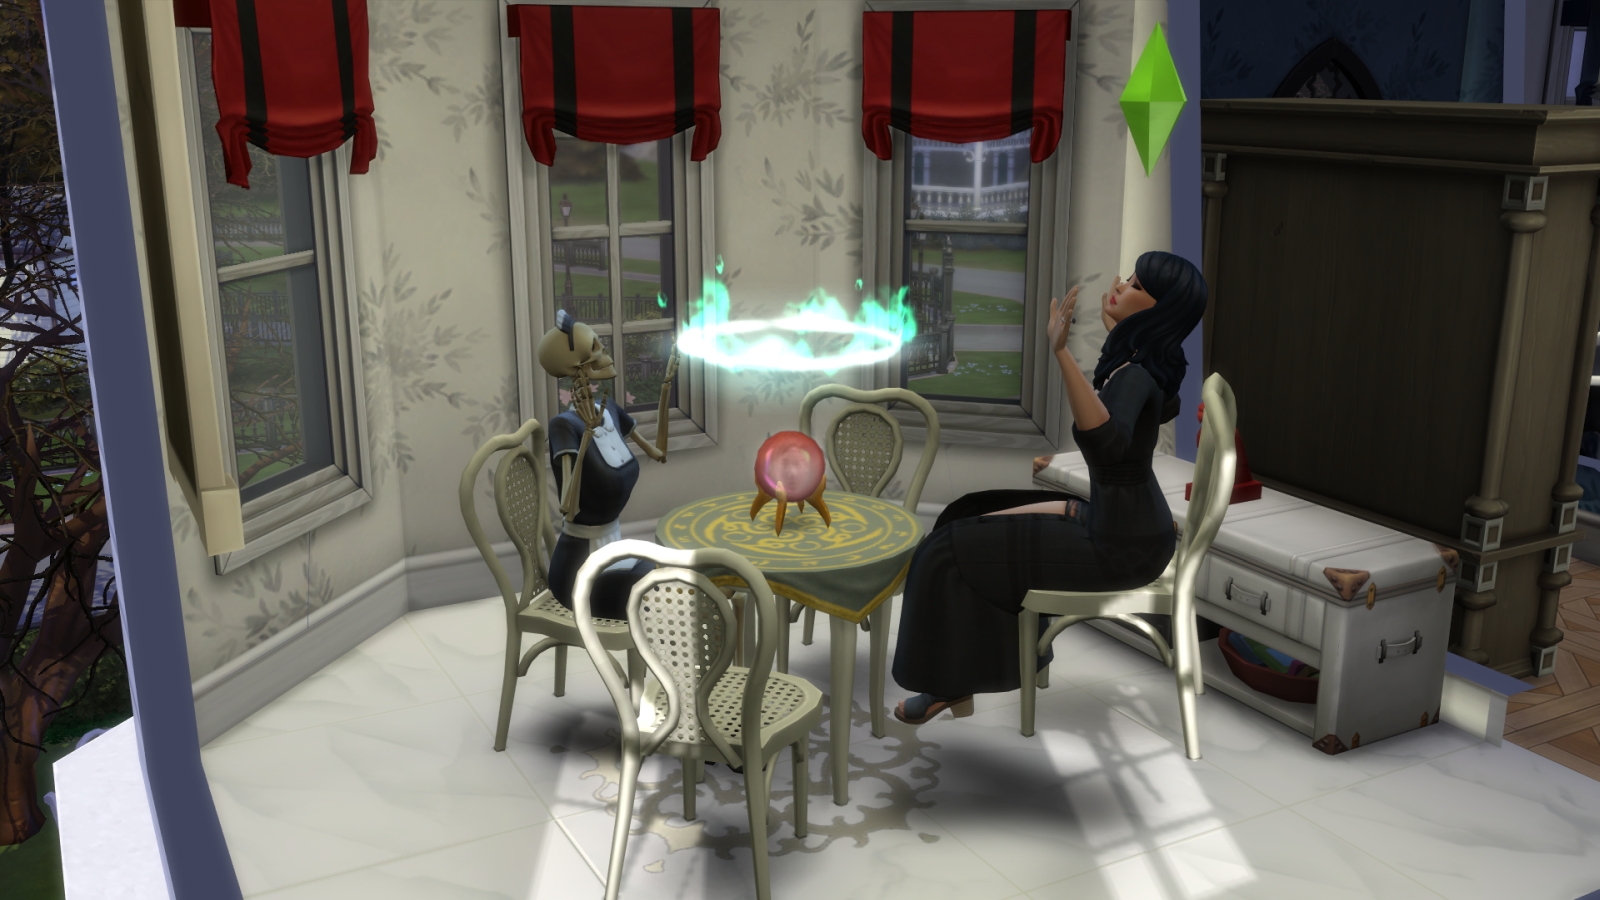 The Pros and Cons of The Sims 4 Paranormal Stuff Pack - Rachybop